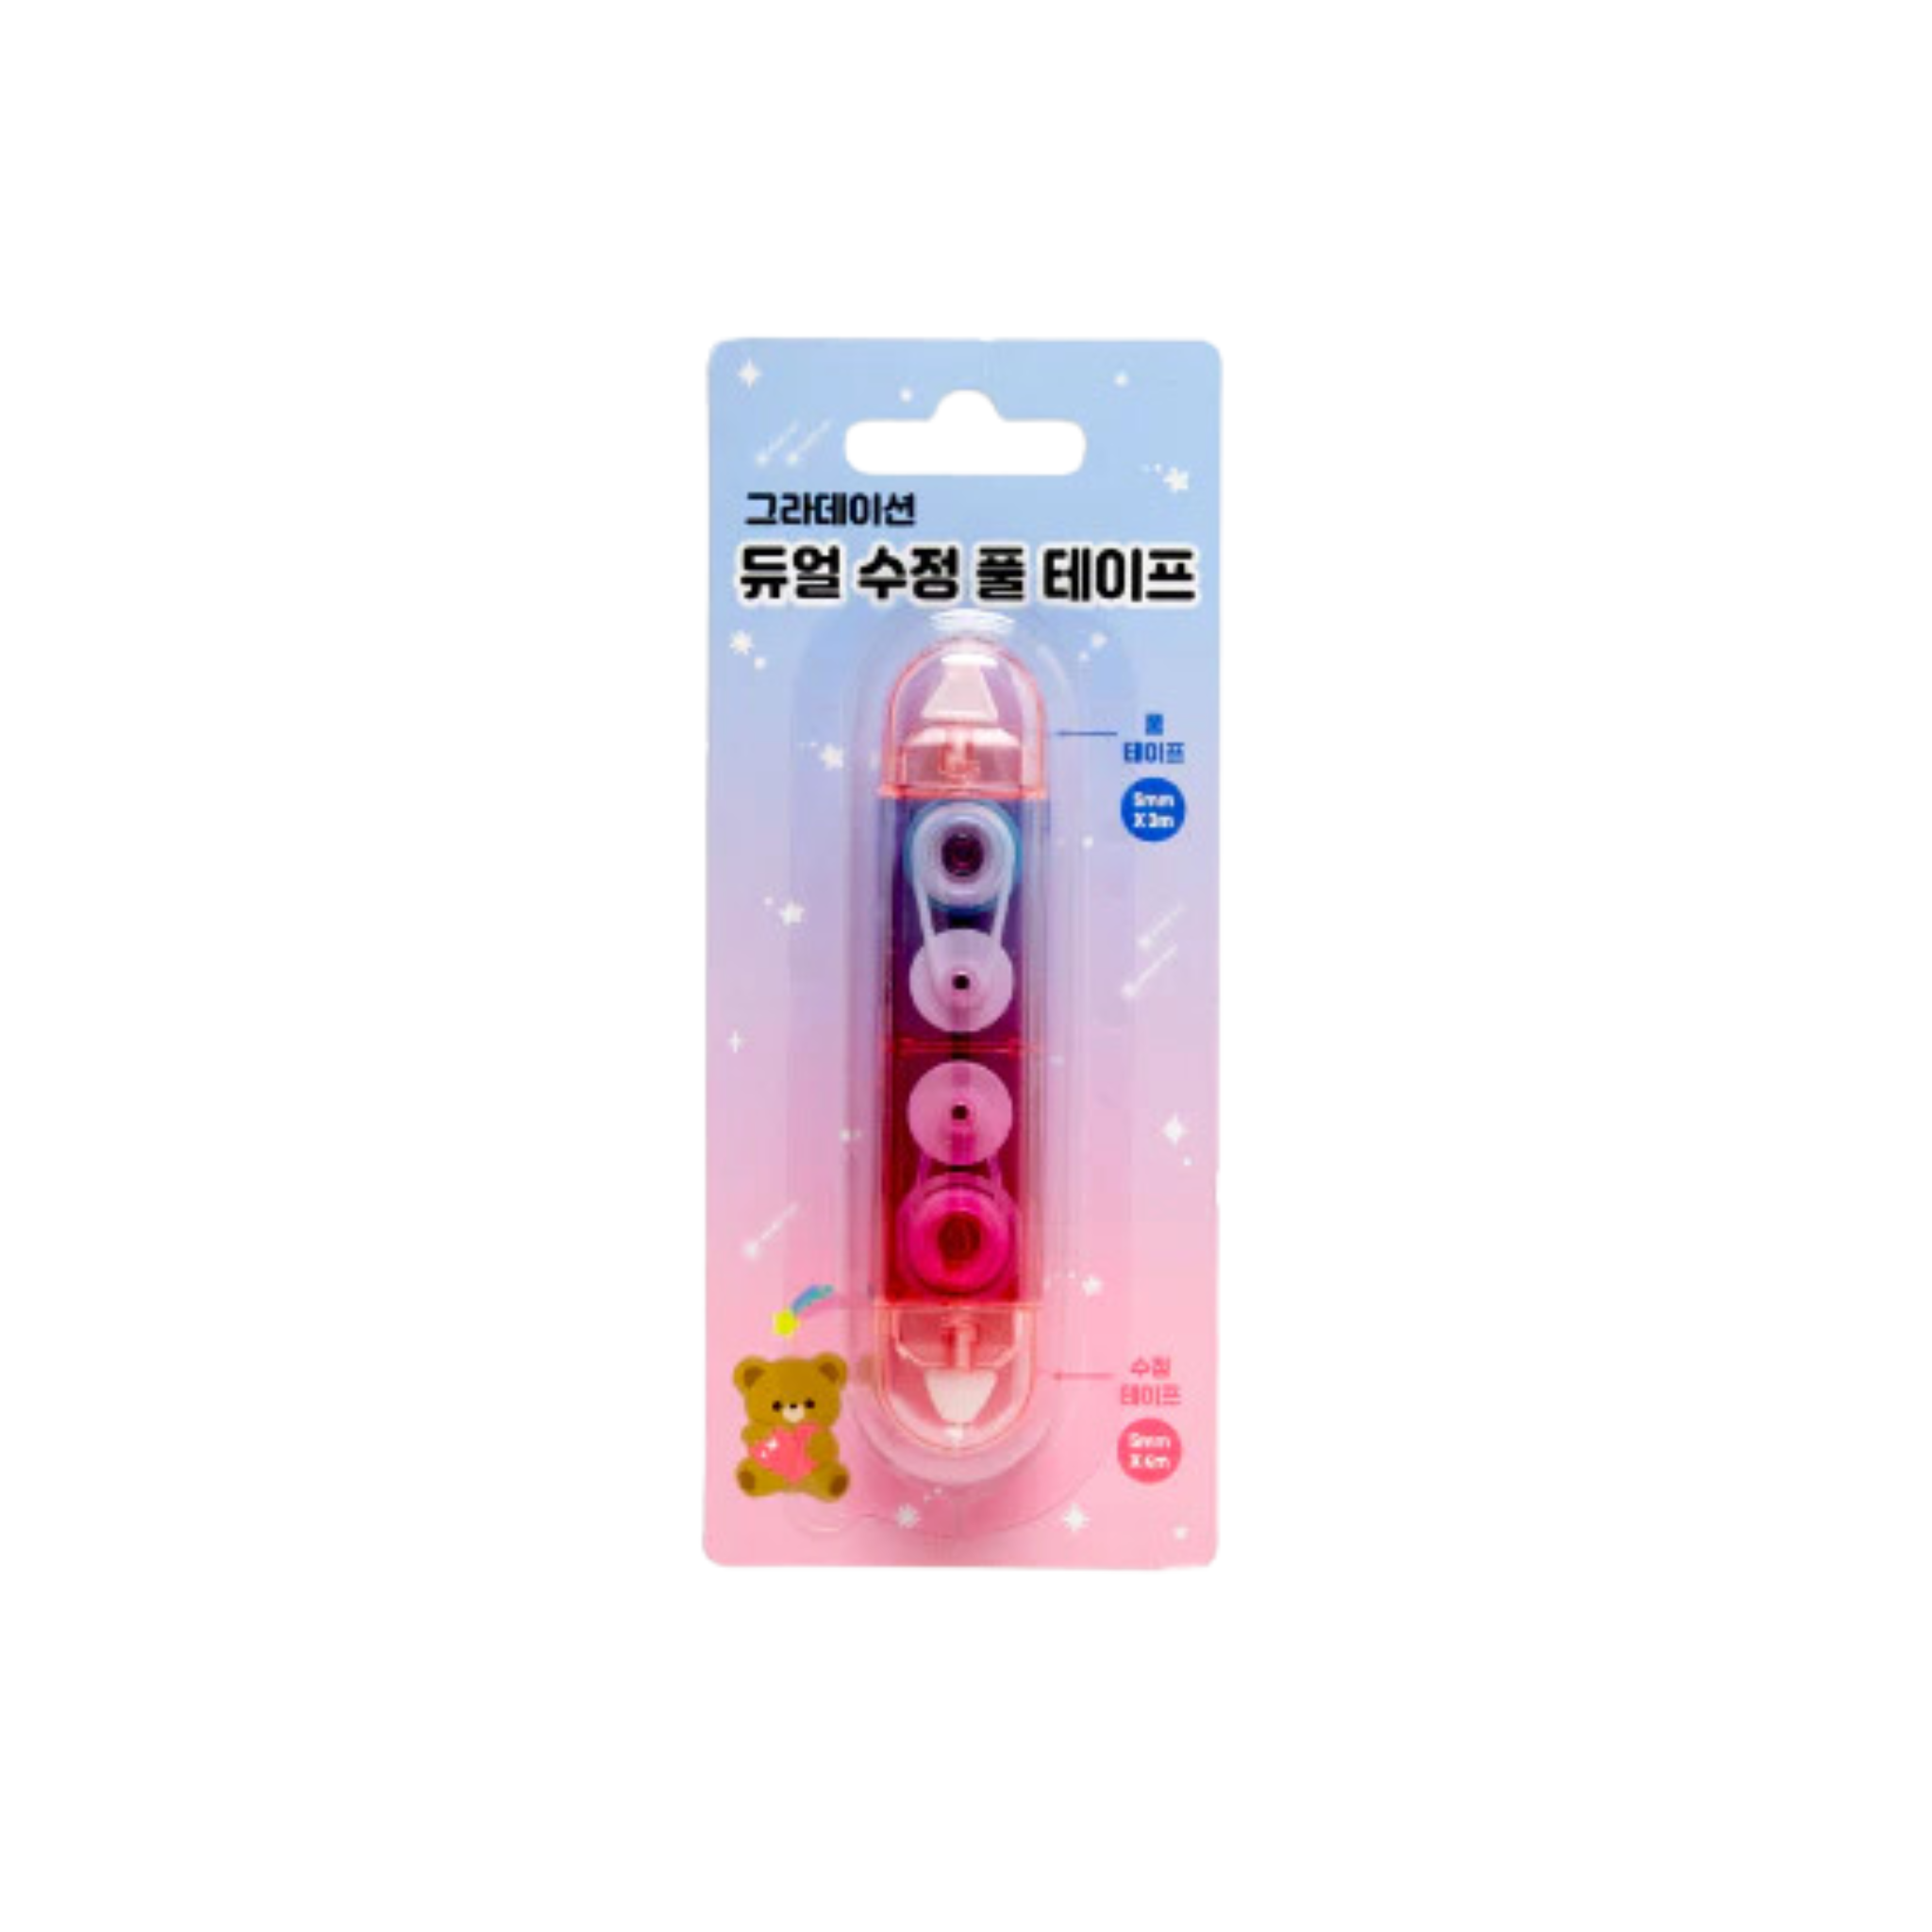 Correction Tape & Glue Tape 2-in-1 Pink